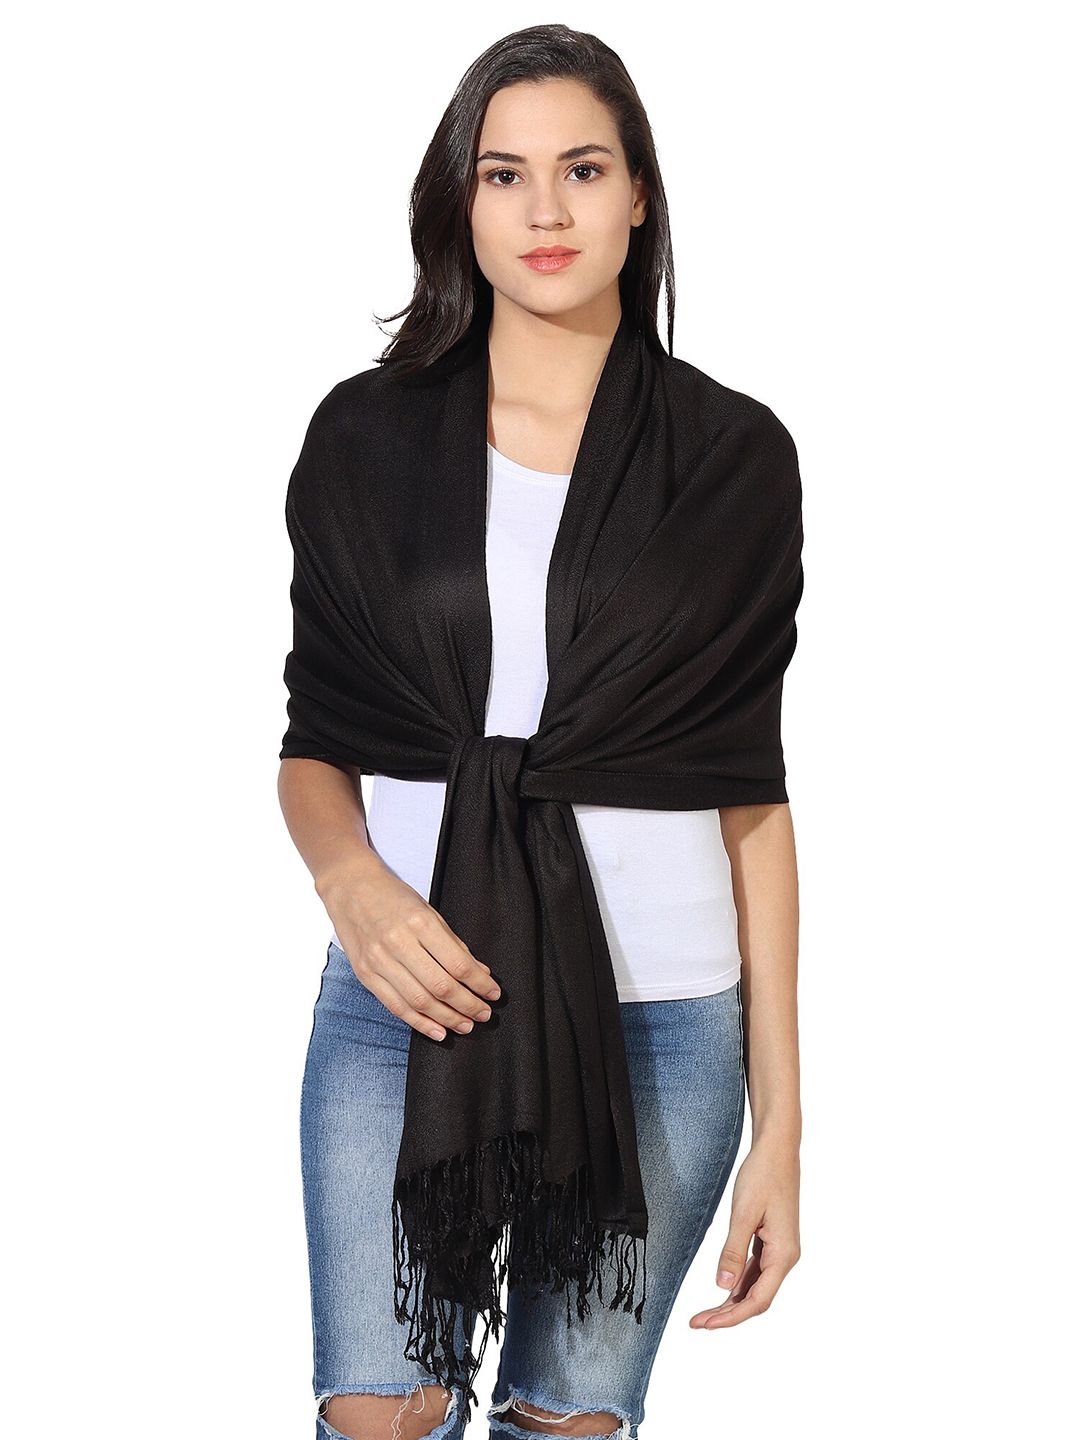 MUFFLY Women Coffee Brown Stoles Price in India